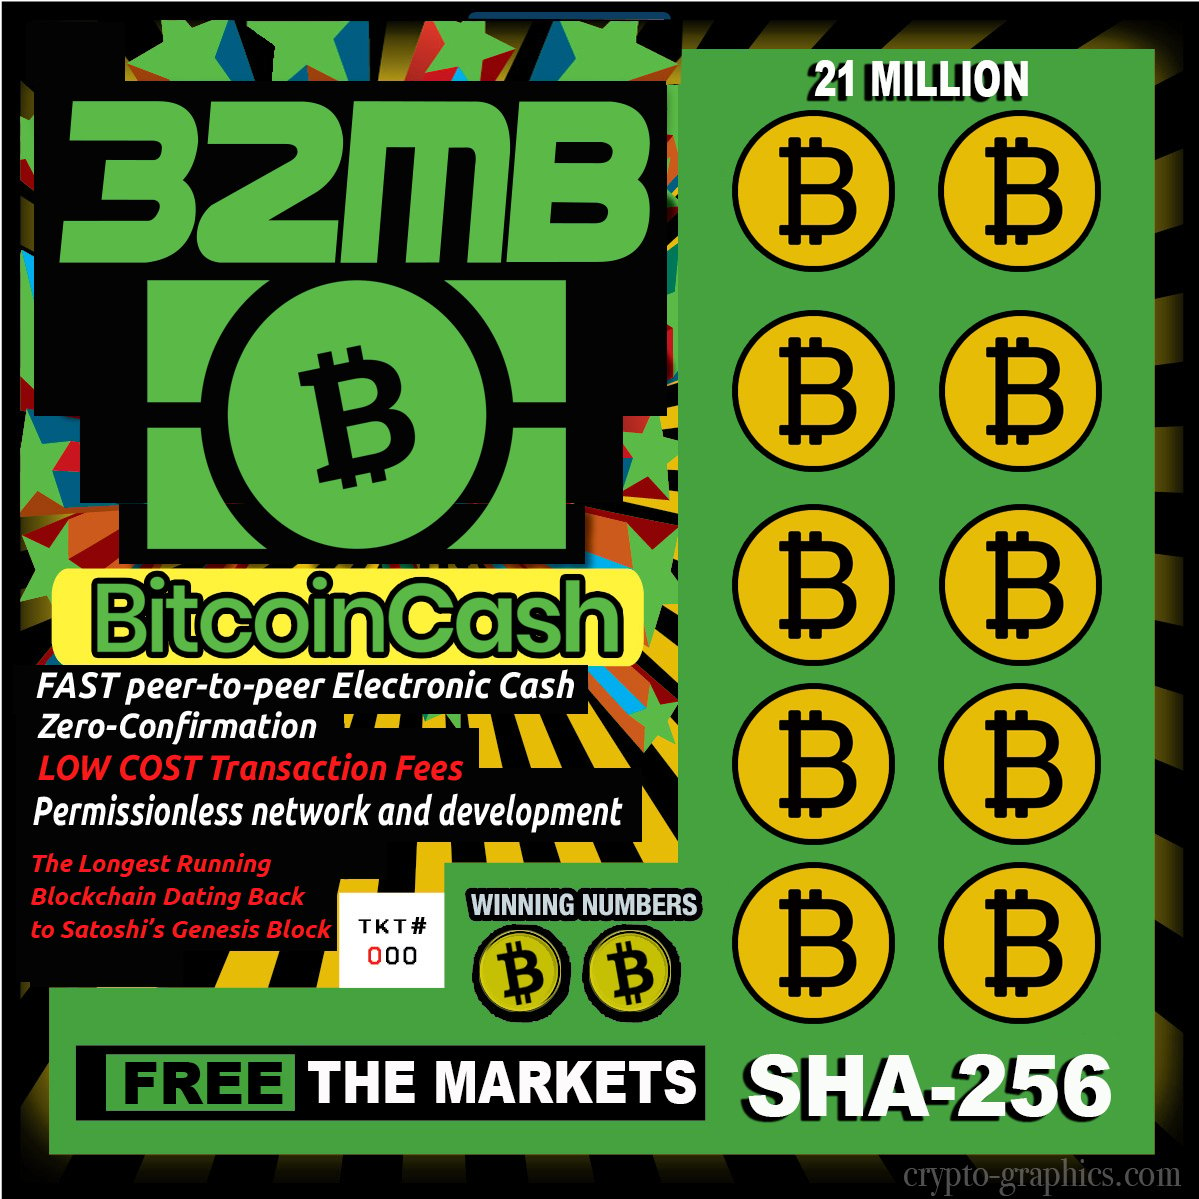 Five Reasons Why Bitcoin Cash Is About To Win Big Bitcoin News - 